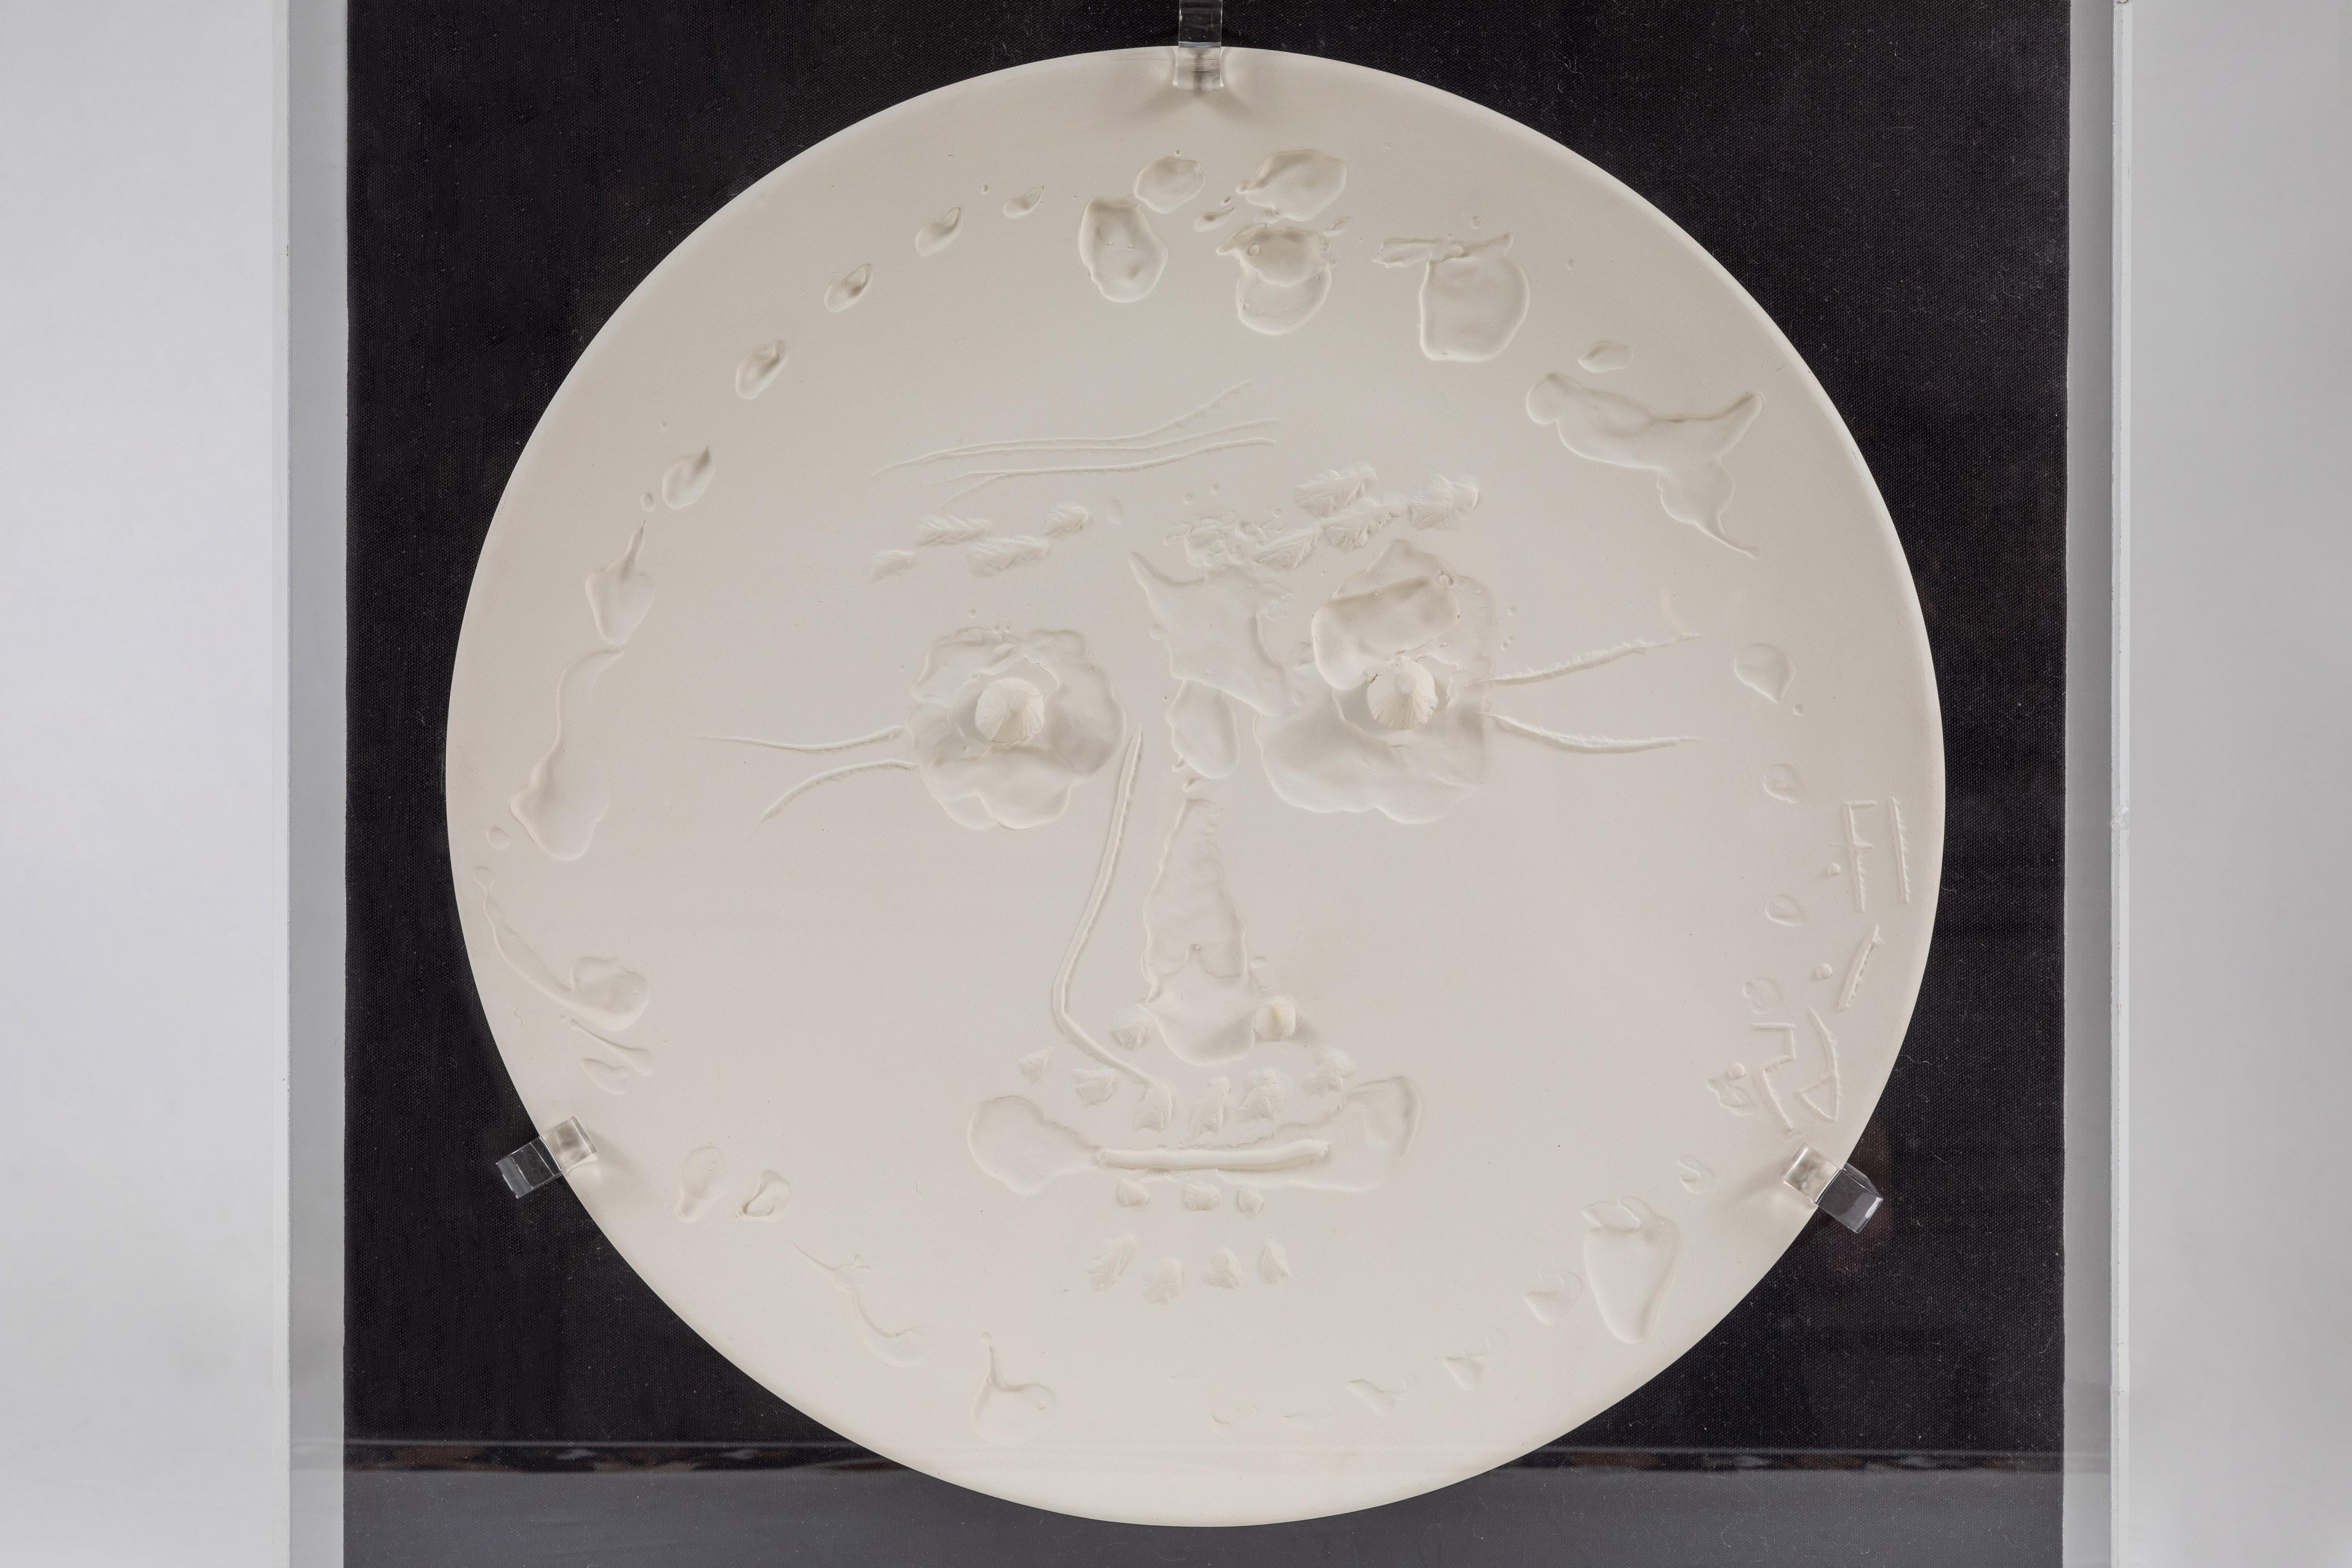 Signed and stamped, large, unglazed light ceramic earthenware plate with raised design from the “Tormented Face” series by Pablo Picassso (1881-1973). Procuced by the Madoura Foundry, France in 1956. Held in a custom, Lucite frame with black velvet